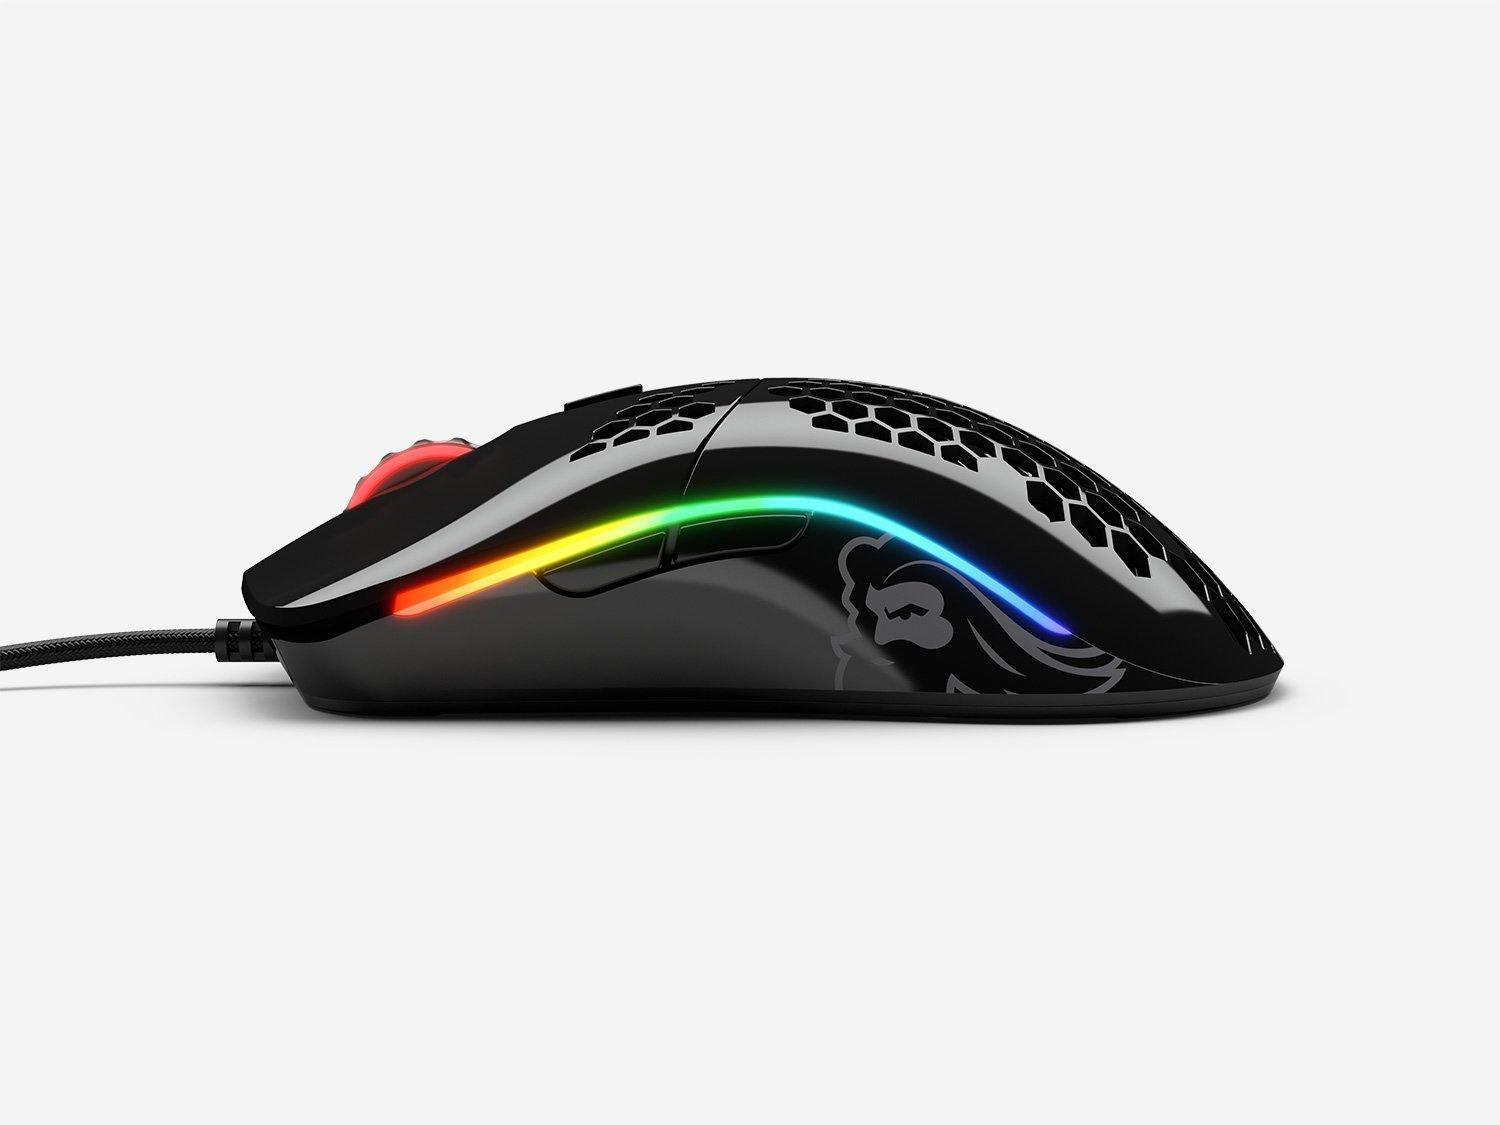 Glorious Gaming Mouse Model O Minus - Glossy Black